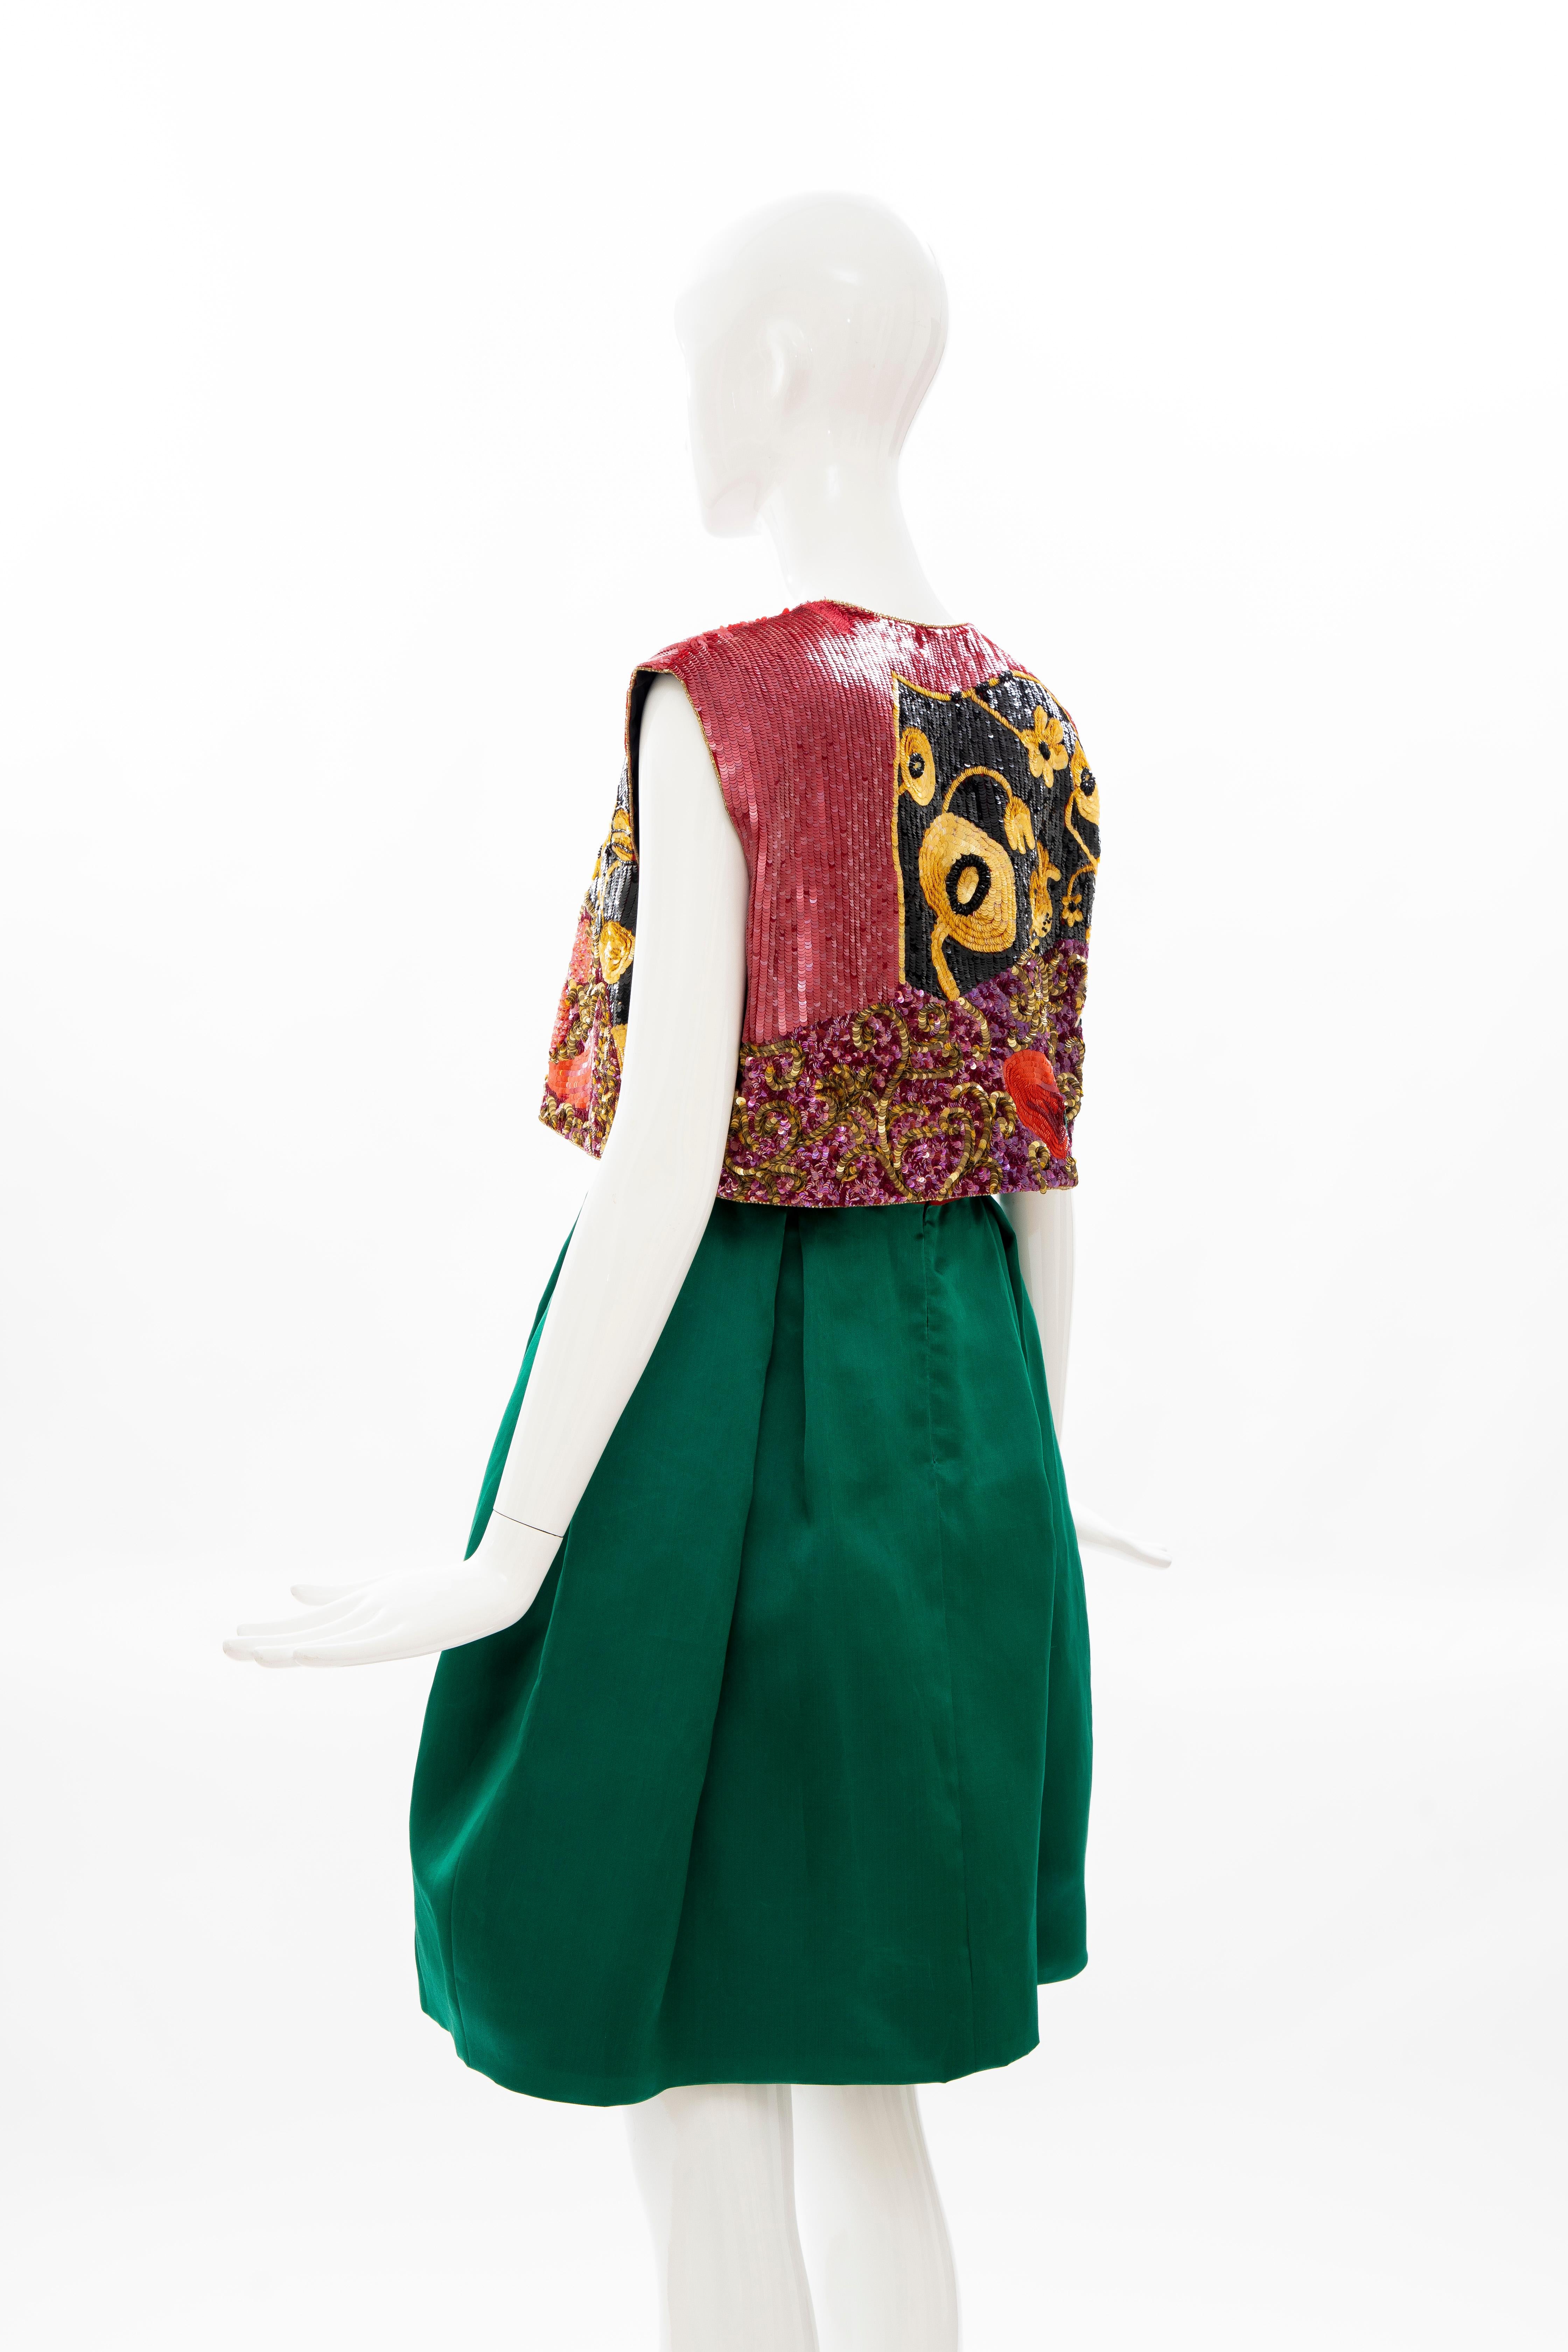 Bill Blass Matisse Inspired Embroidered Sequined Dress Ensemble, Spring 1988 For Sale 6